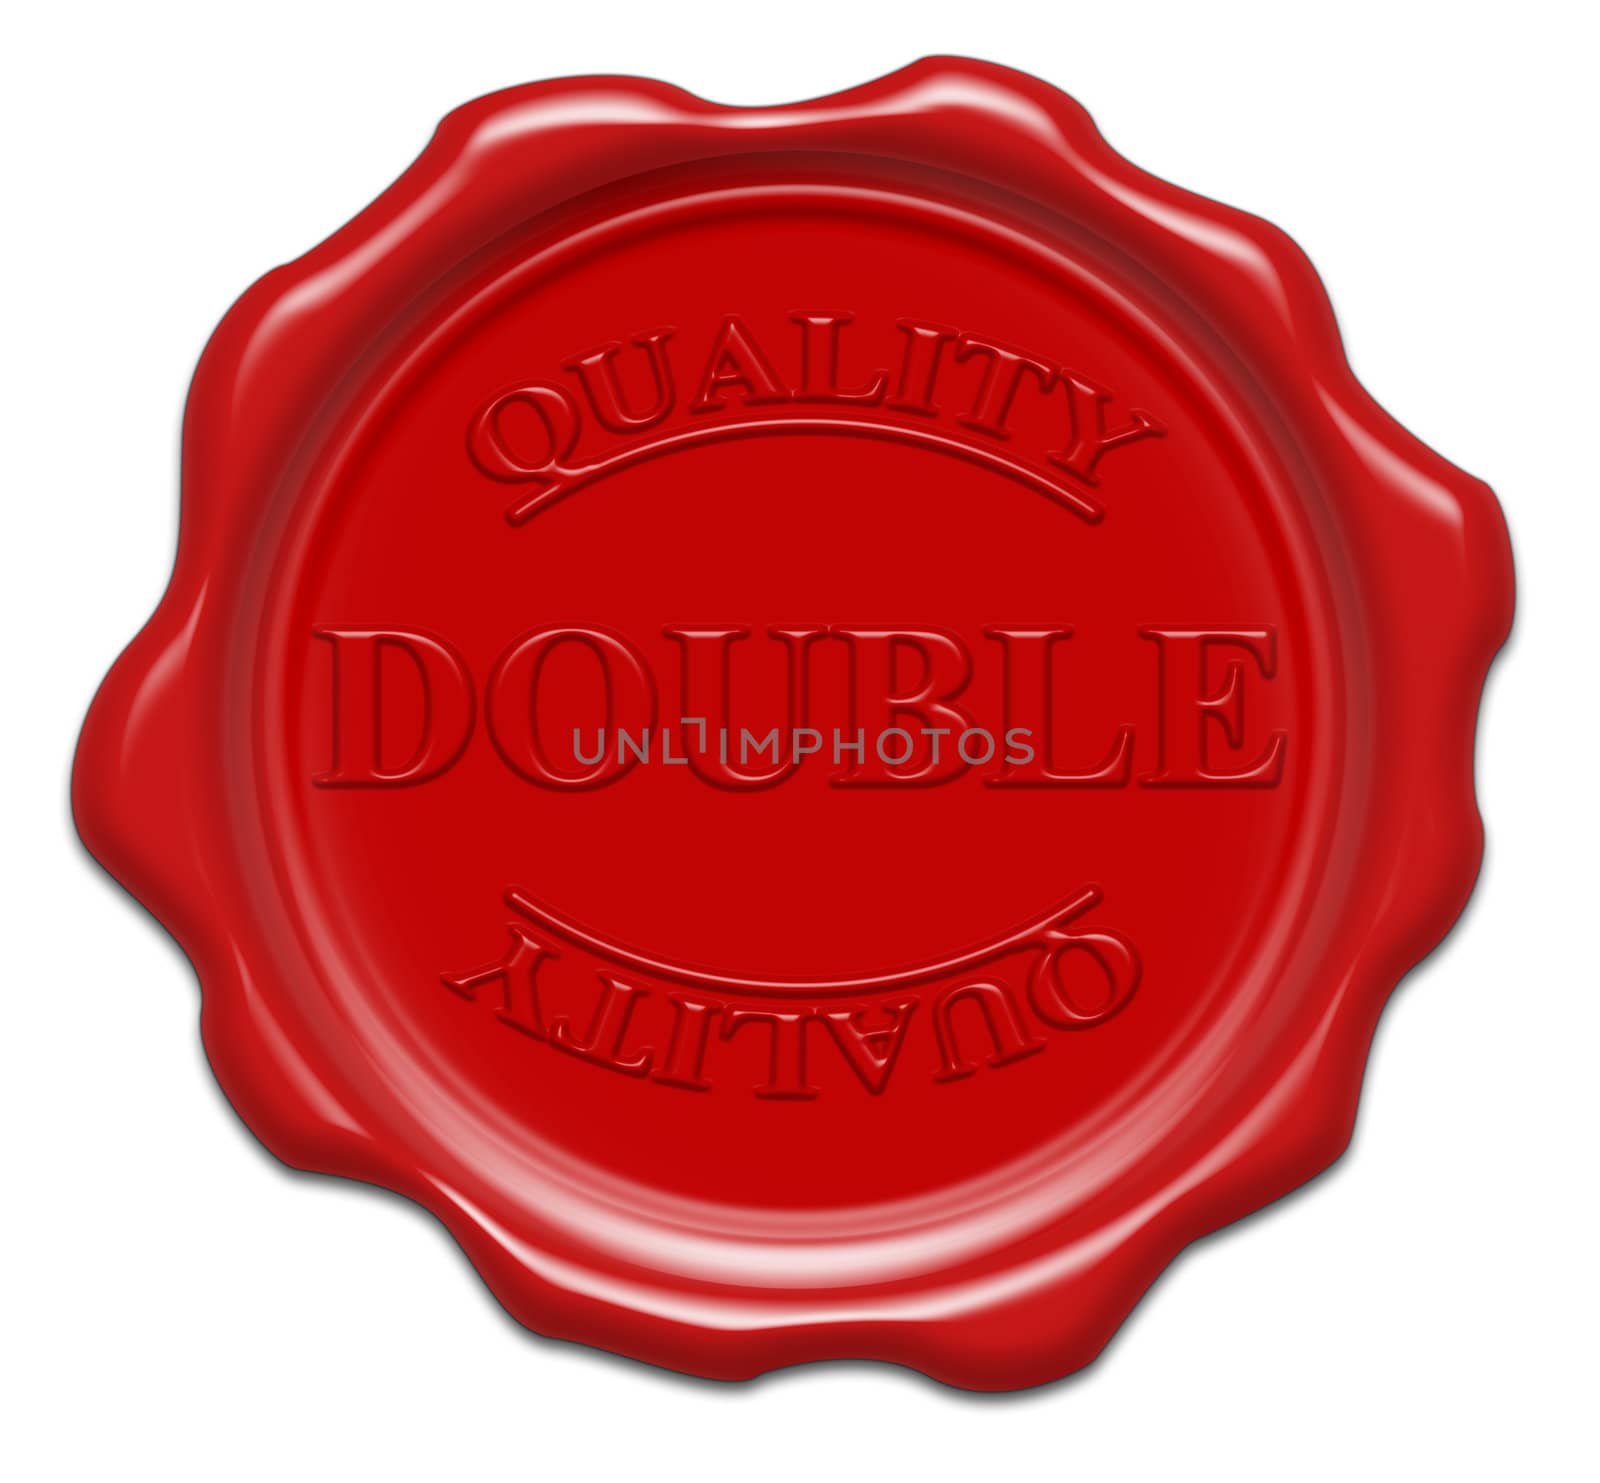 double quality - illustration red wax seal isolated on white background with word : double